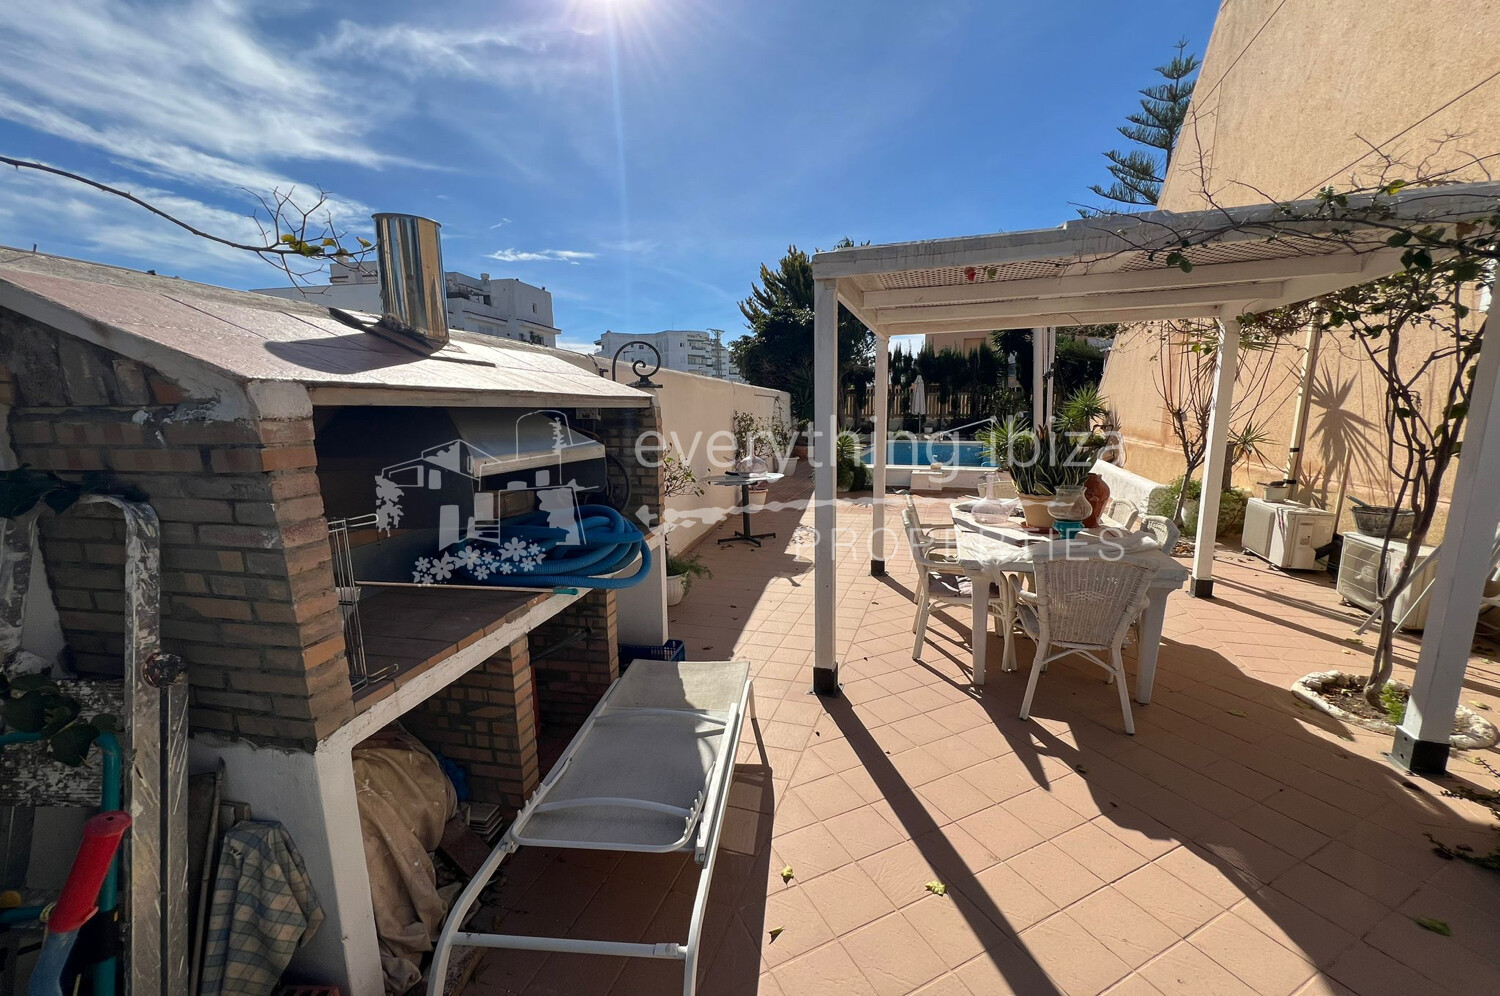 Townhouse Near Beach with Sunset Views, Private Pool and Gardens, ref. 1680, on sale in Ibiza by everything ibiza Properties